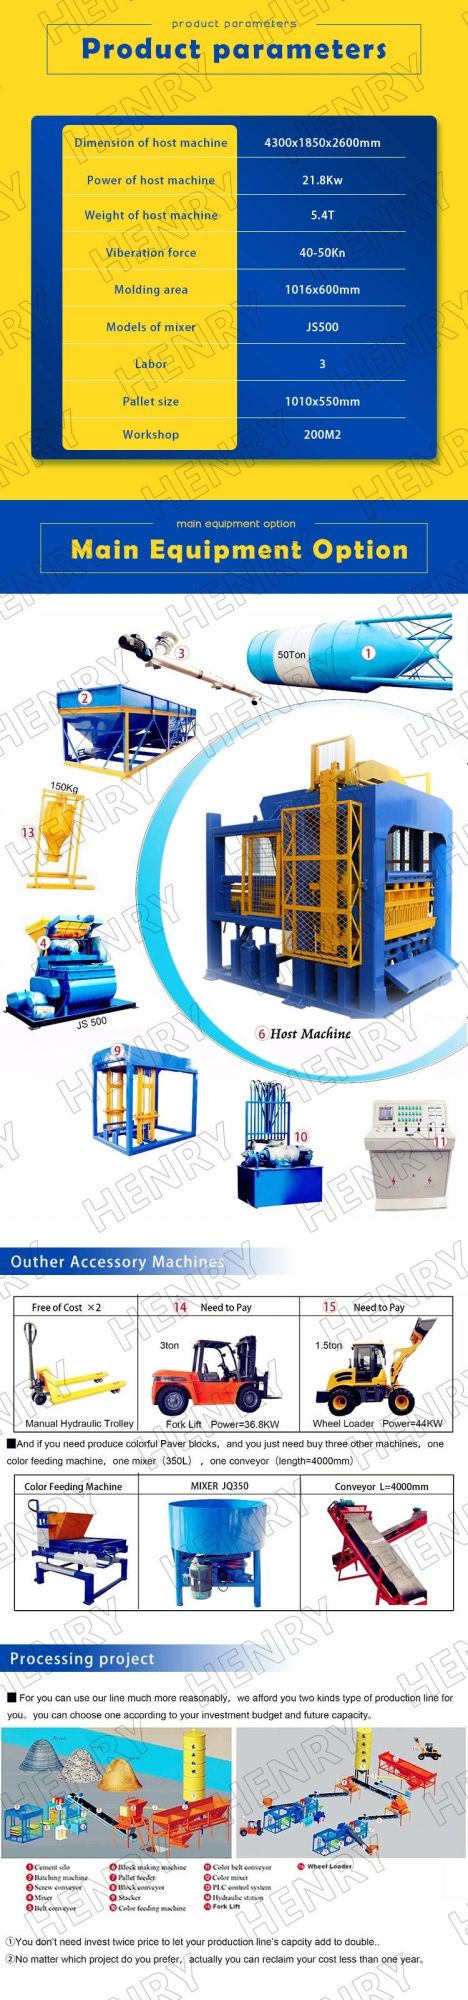 Qt4-15 Fully Automatic Hollow Block and Pavers Machine Price Curbstone Machine Price Best Sale in MID-East Area